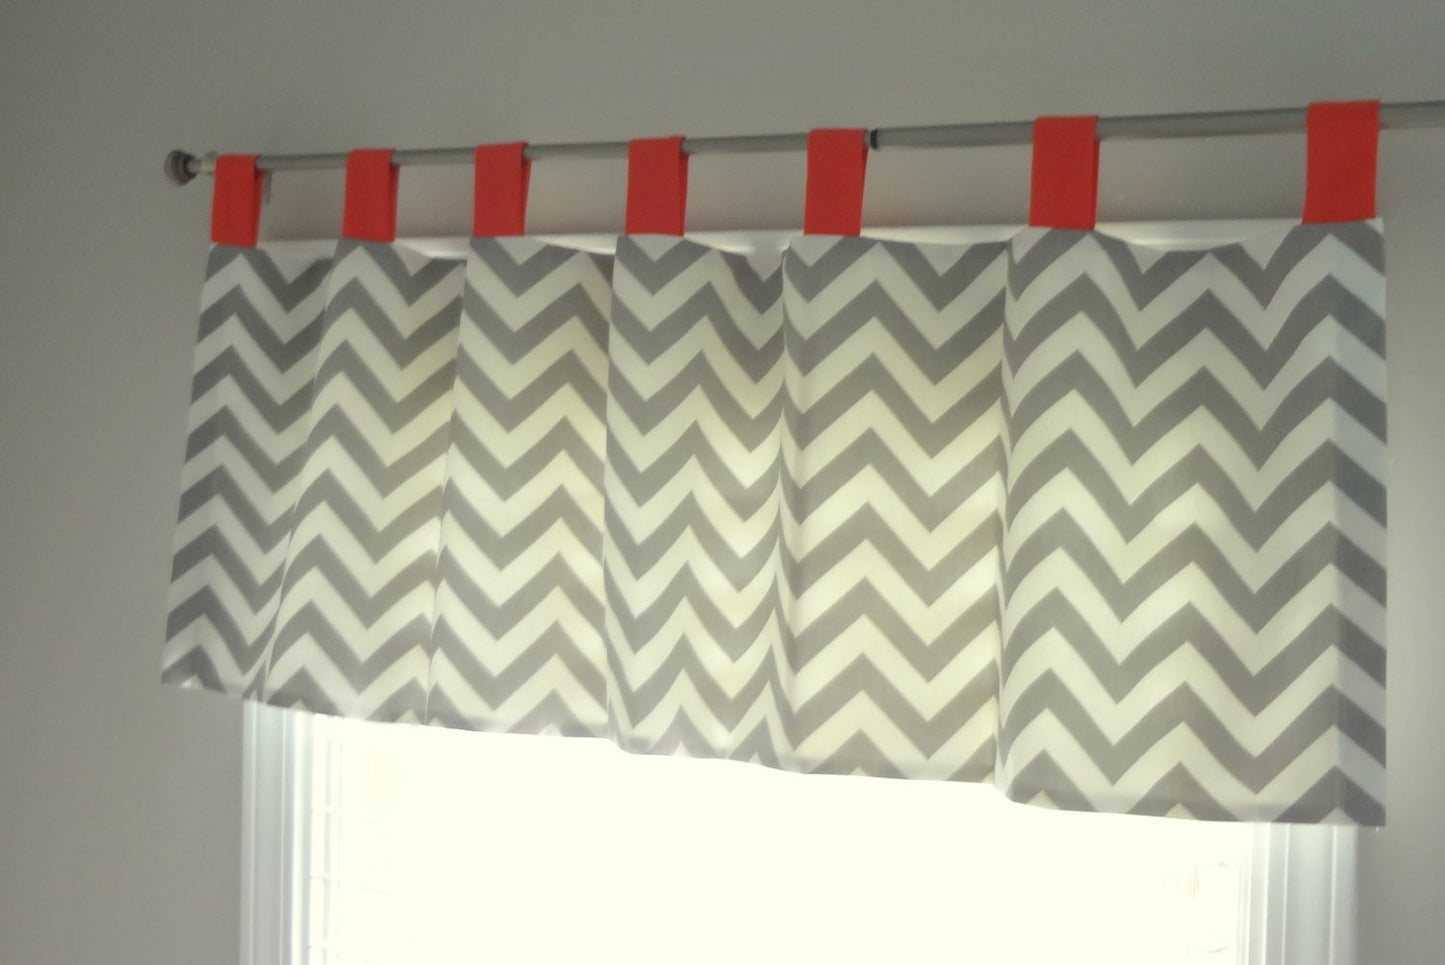 Custom nursery Tab Top Chevron valance. Available in other collections.